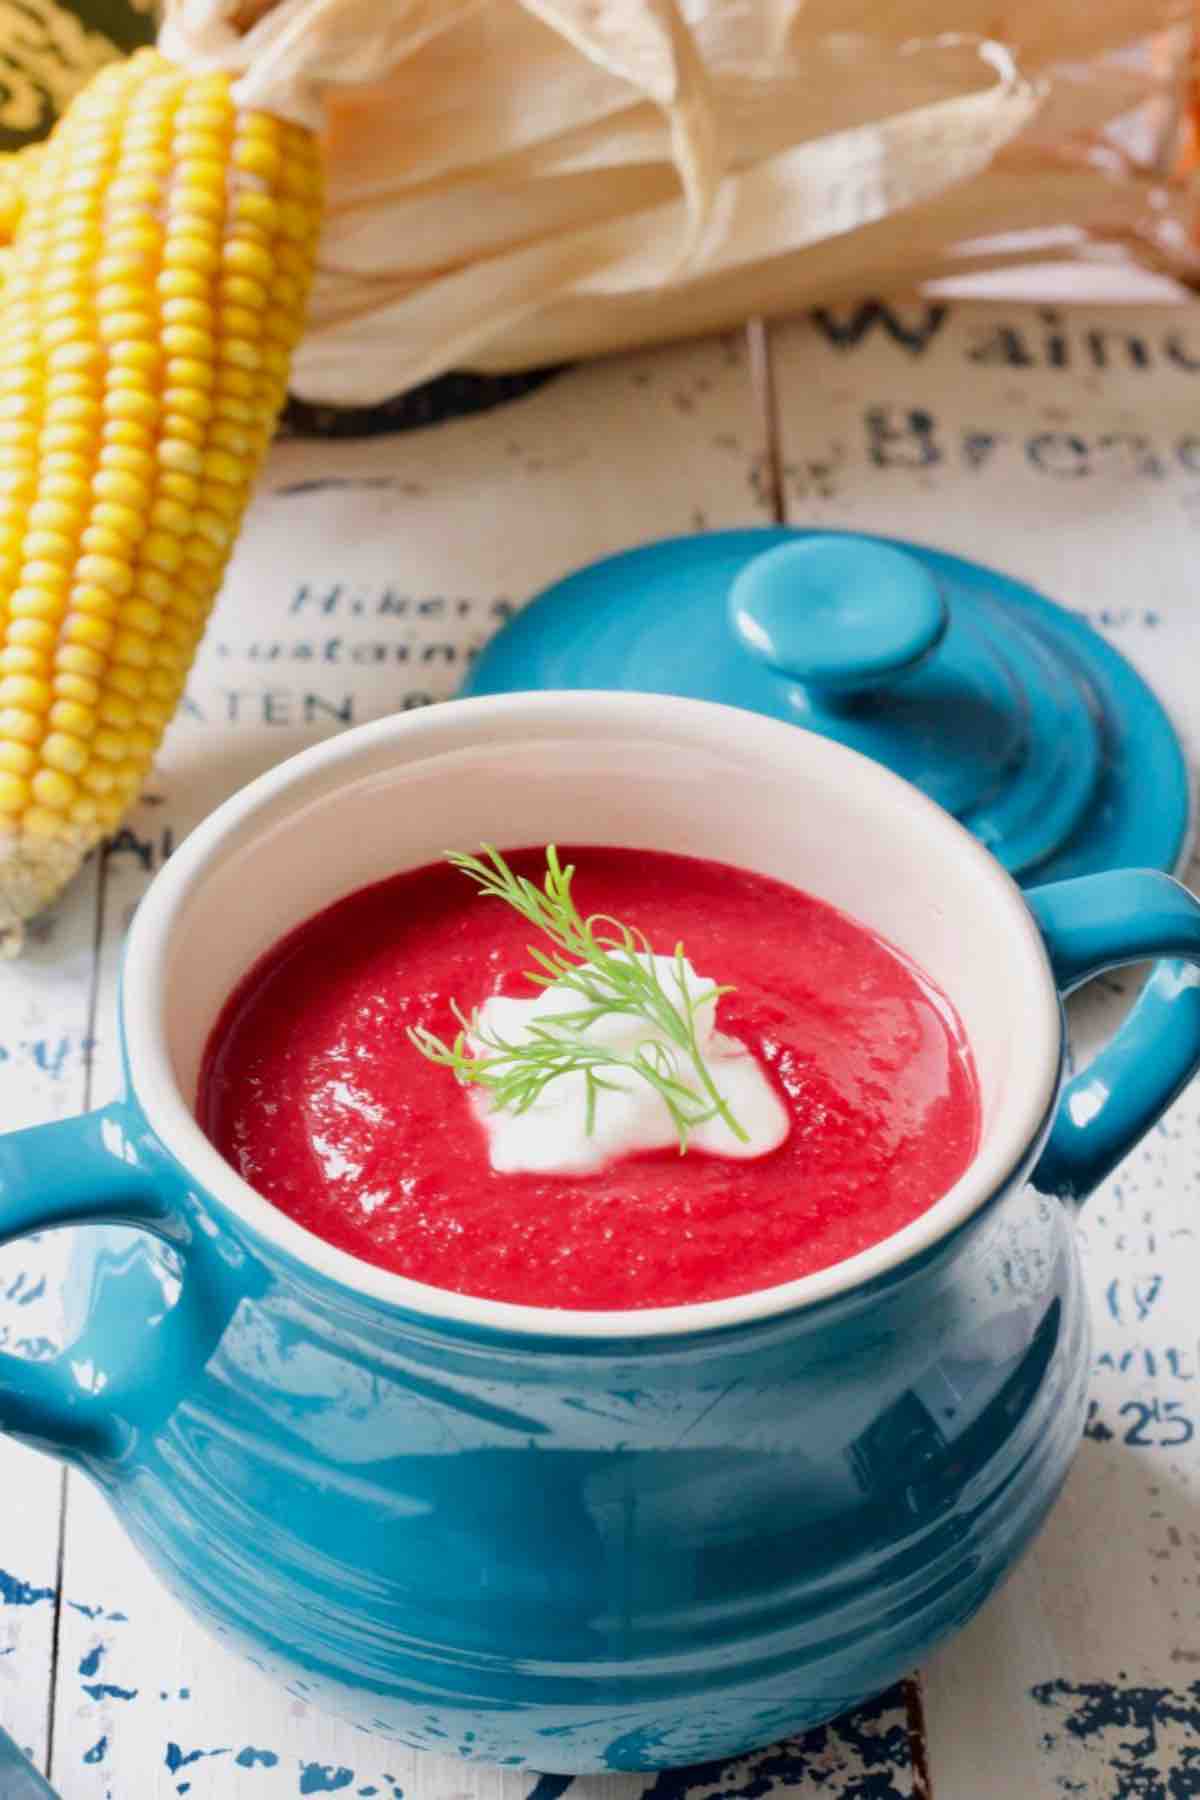 Beetroot soup in a soup bowl with yogurt and dill on top.